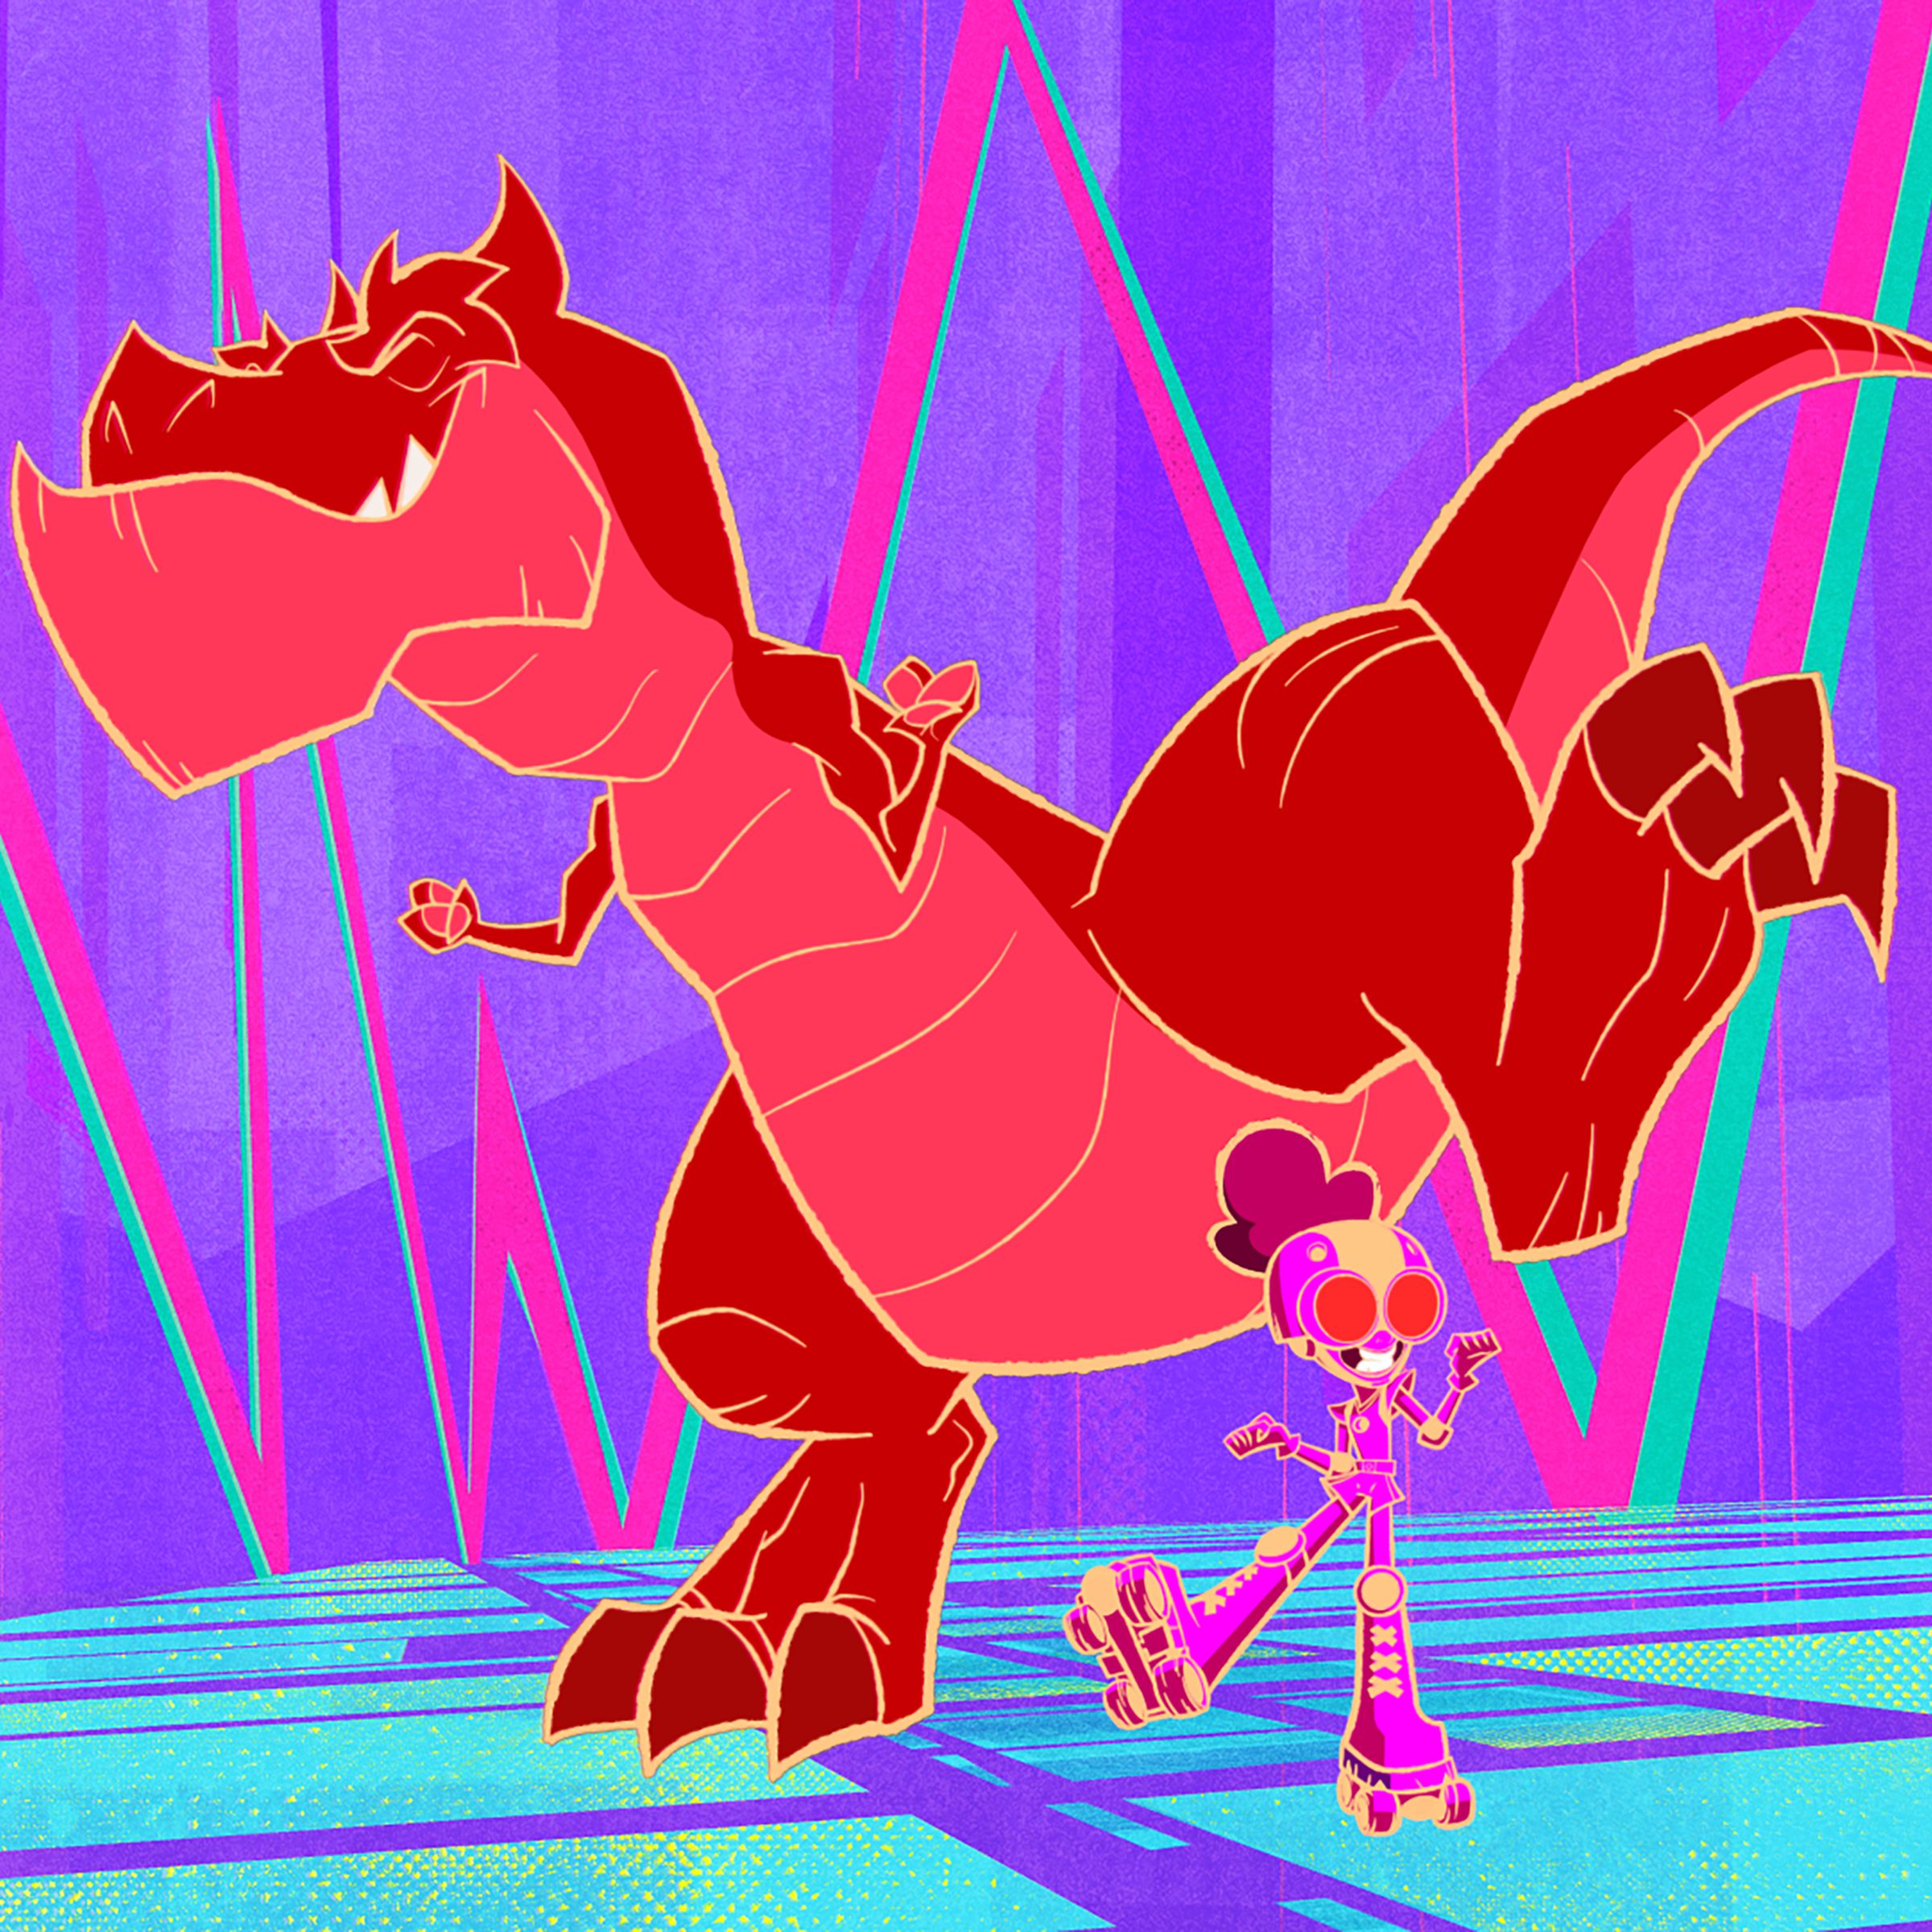 A cartoon tyrannosaurus rex dancing behind a little girl wearing a helmet, goggles, a two-toned shirt, shorts, kneepads, and roller skates, The two are dancing on a disco ball-like grid.